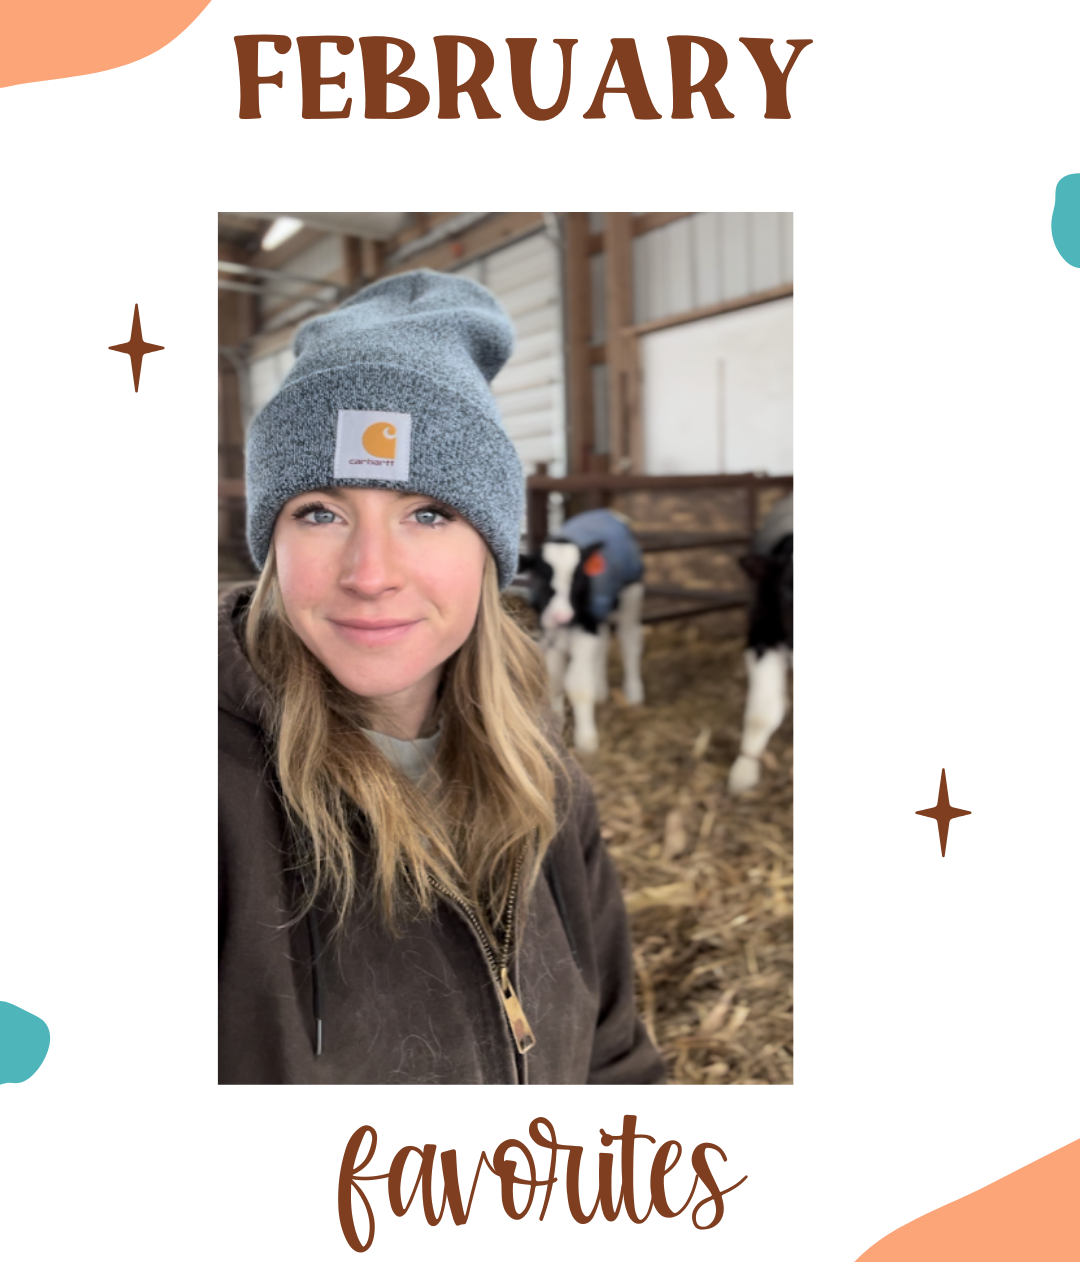 My February favorites from your farmer friend!